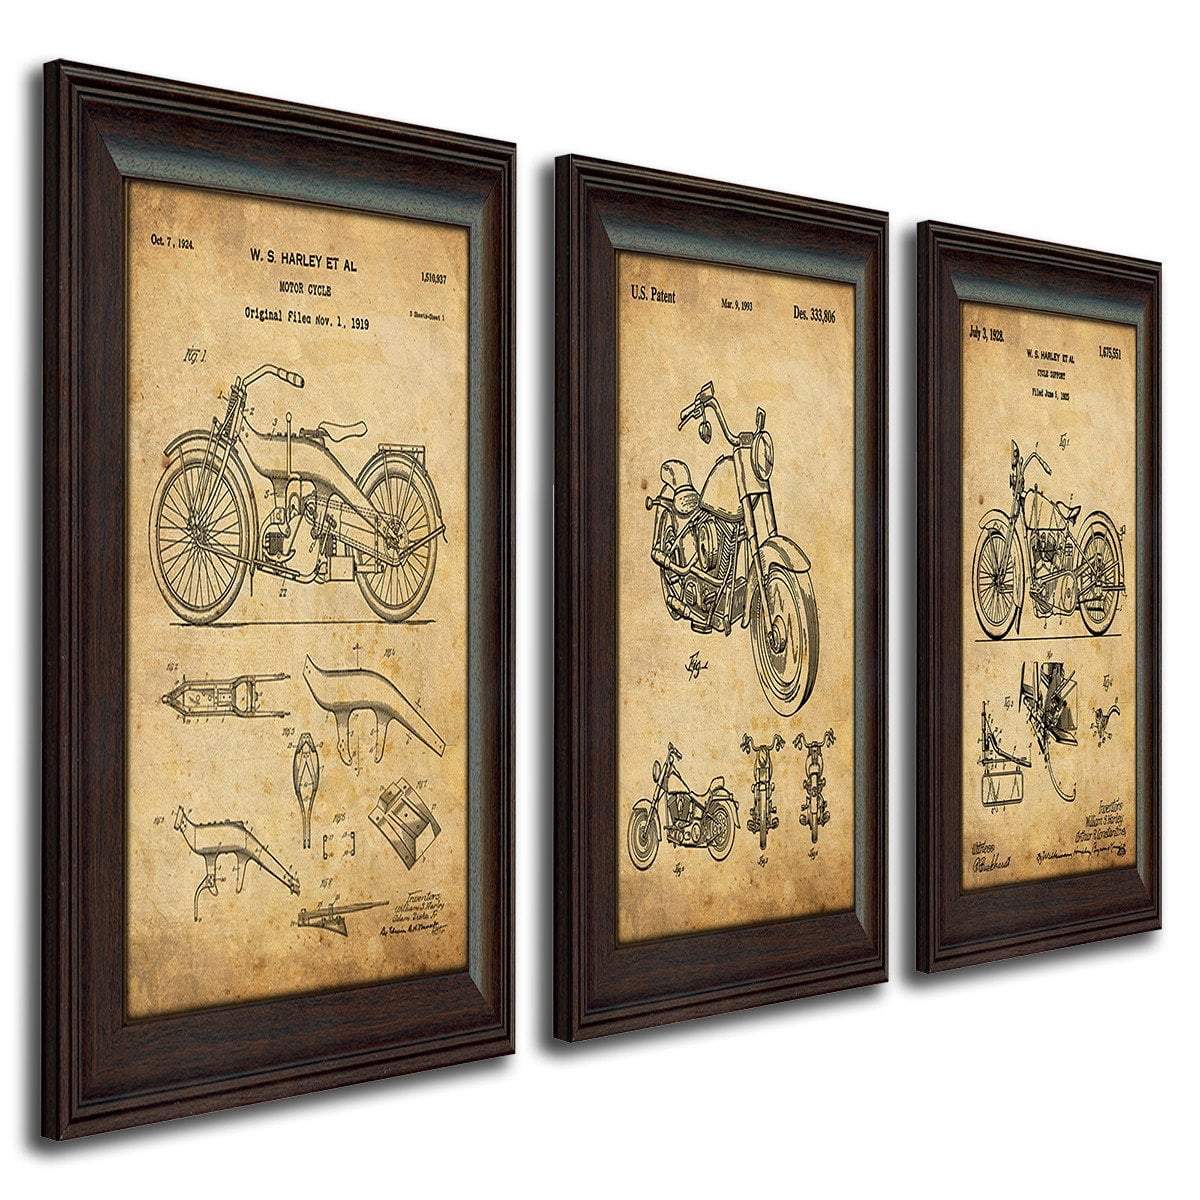 US Patent drawing art prints for Harley Davidson motorcycles - Personal-Prints